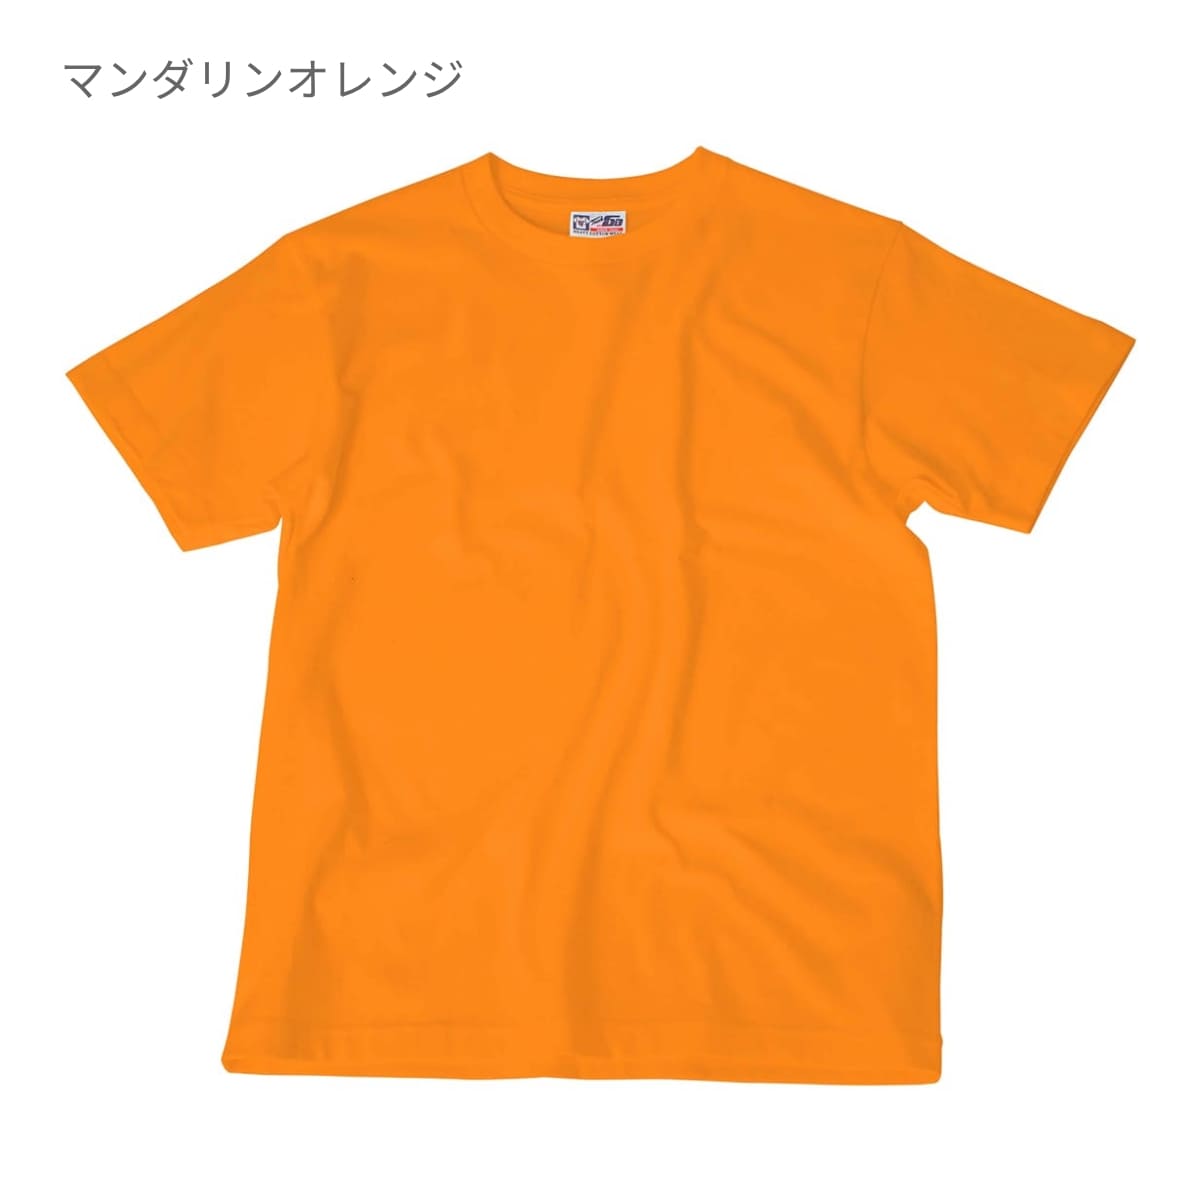 Touch and Go Ｔシャツ | ビッグサイズ | 1枚 | SS1030 | カフェオーレ